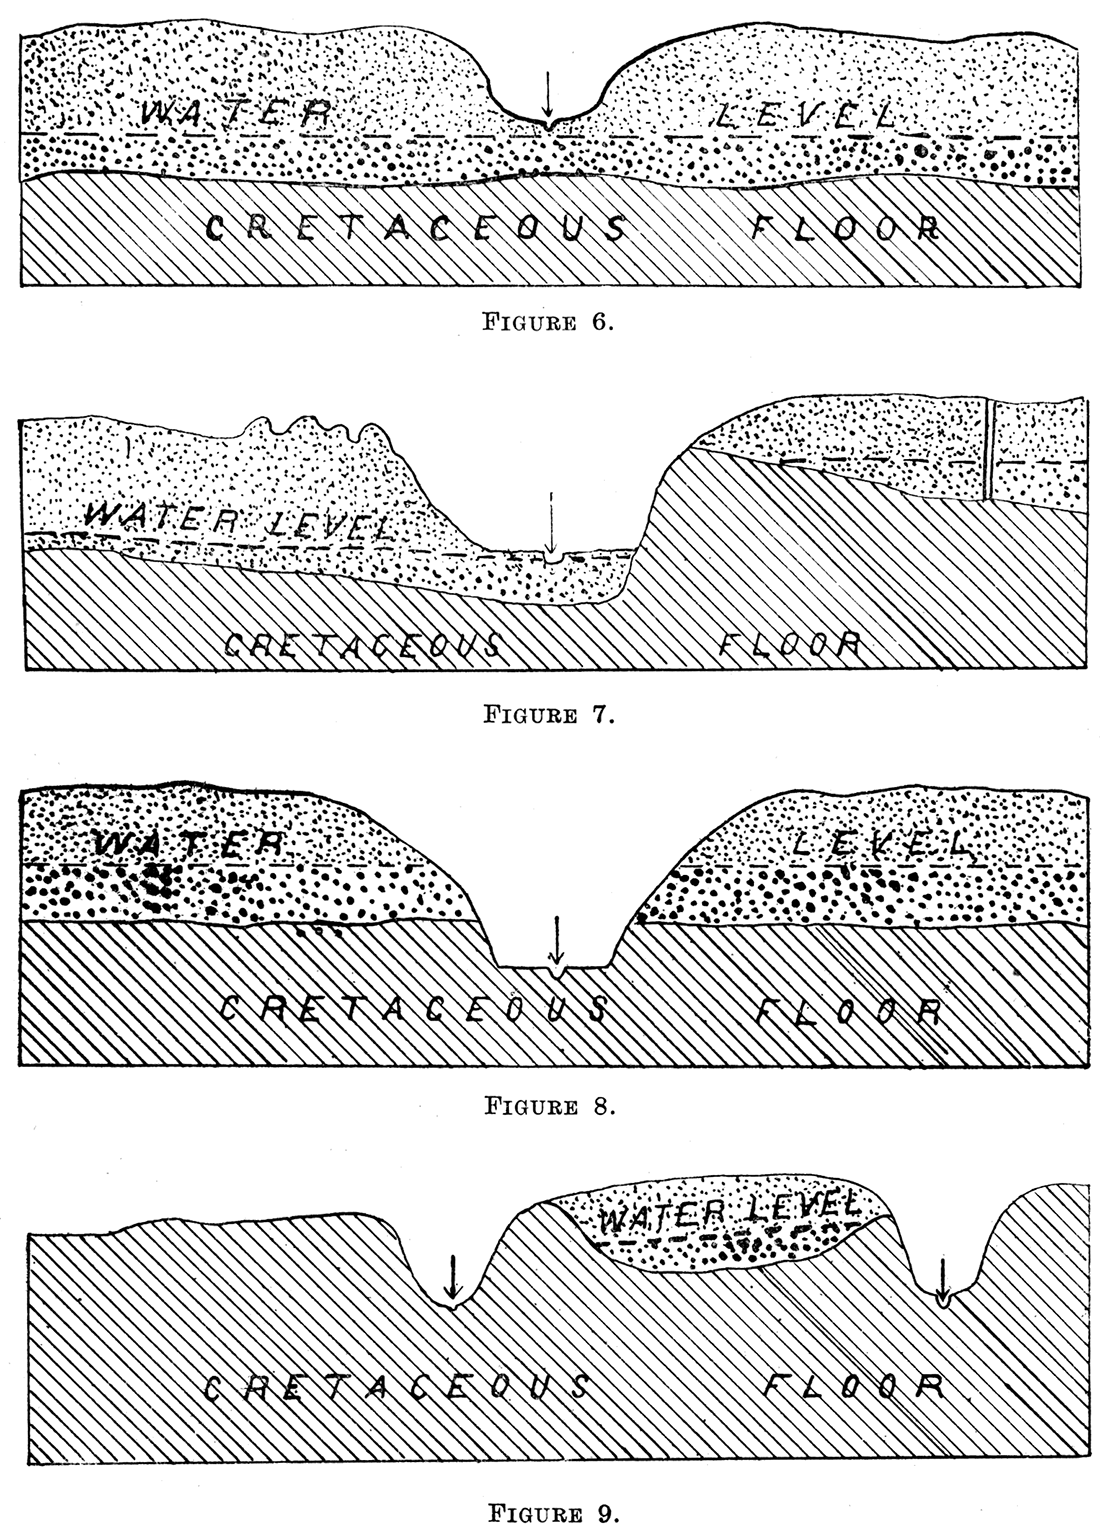 Four sketches of stream conditions and interconnections.